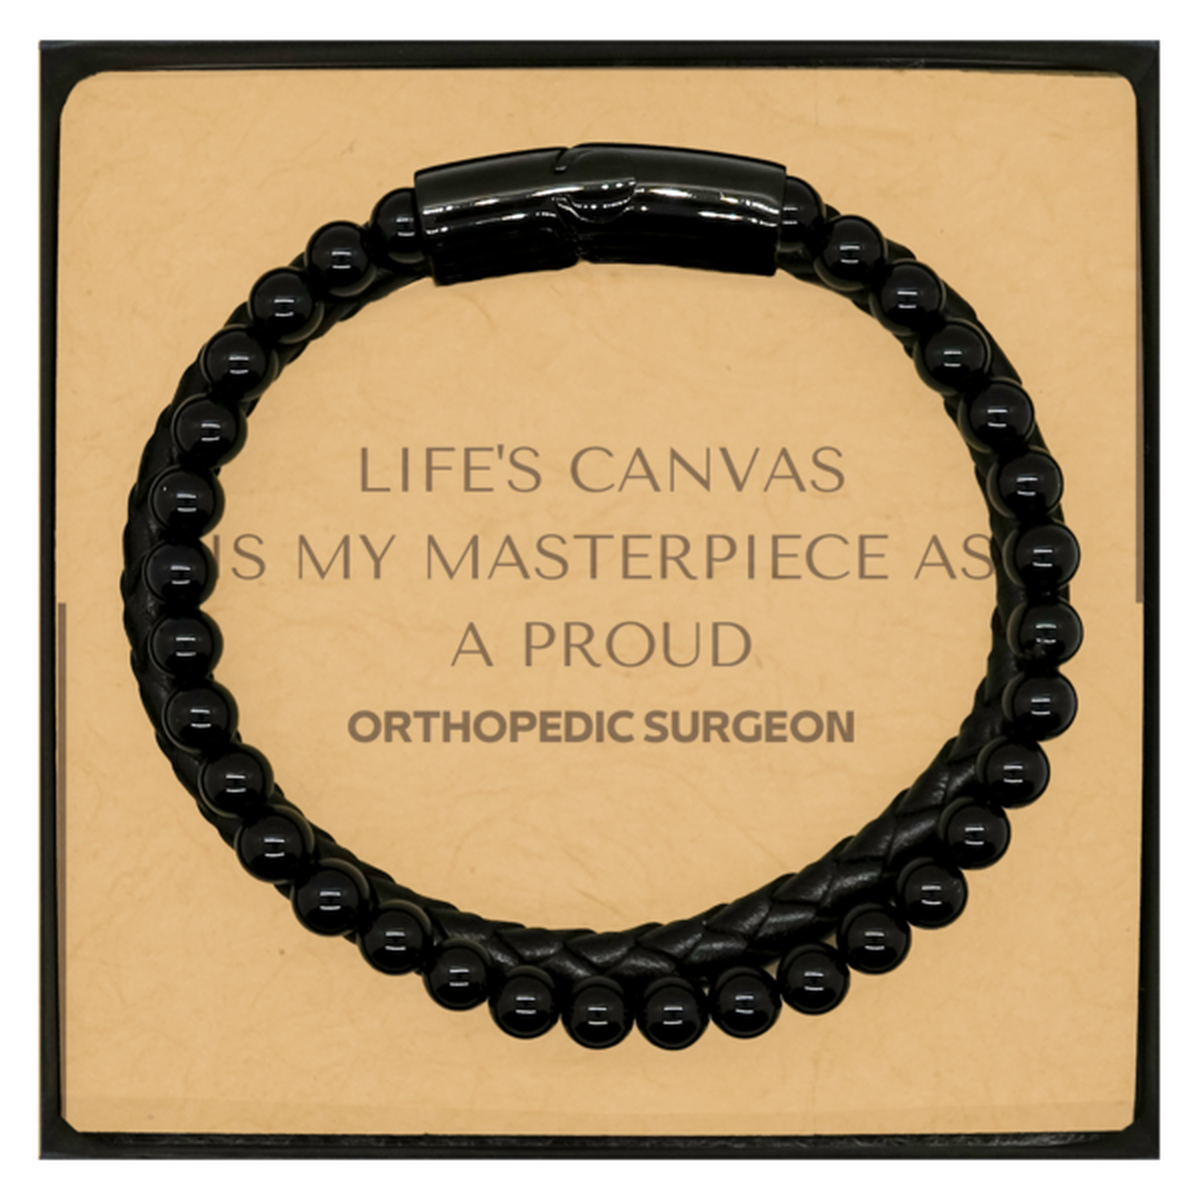 Proud Orthopedic Surgeon Gifts, Life's canvas is my masterpiece, Epic Birthday Christmas Unique Stone Leather Bracelets For Orthopedic Surgeon, Coworkers, Men, Women, Friends